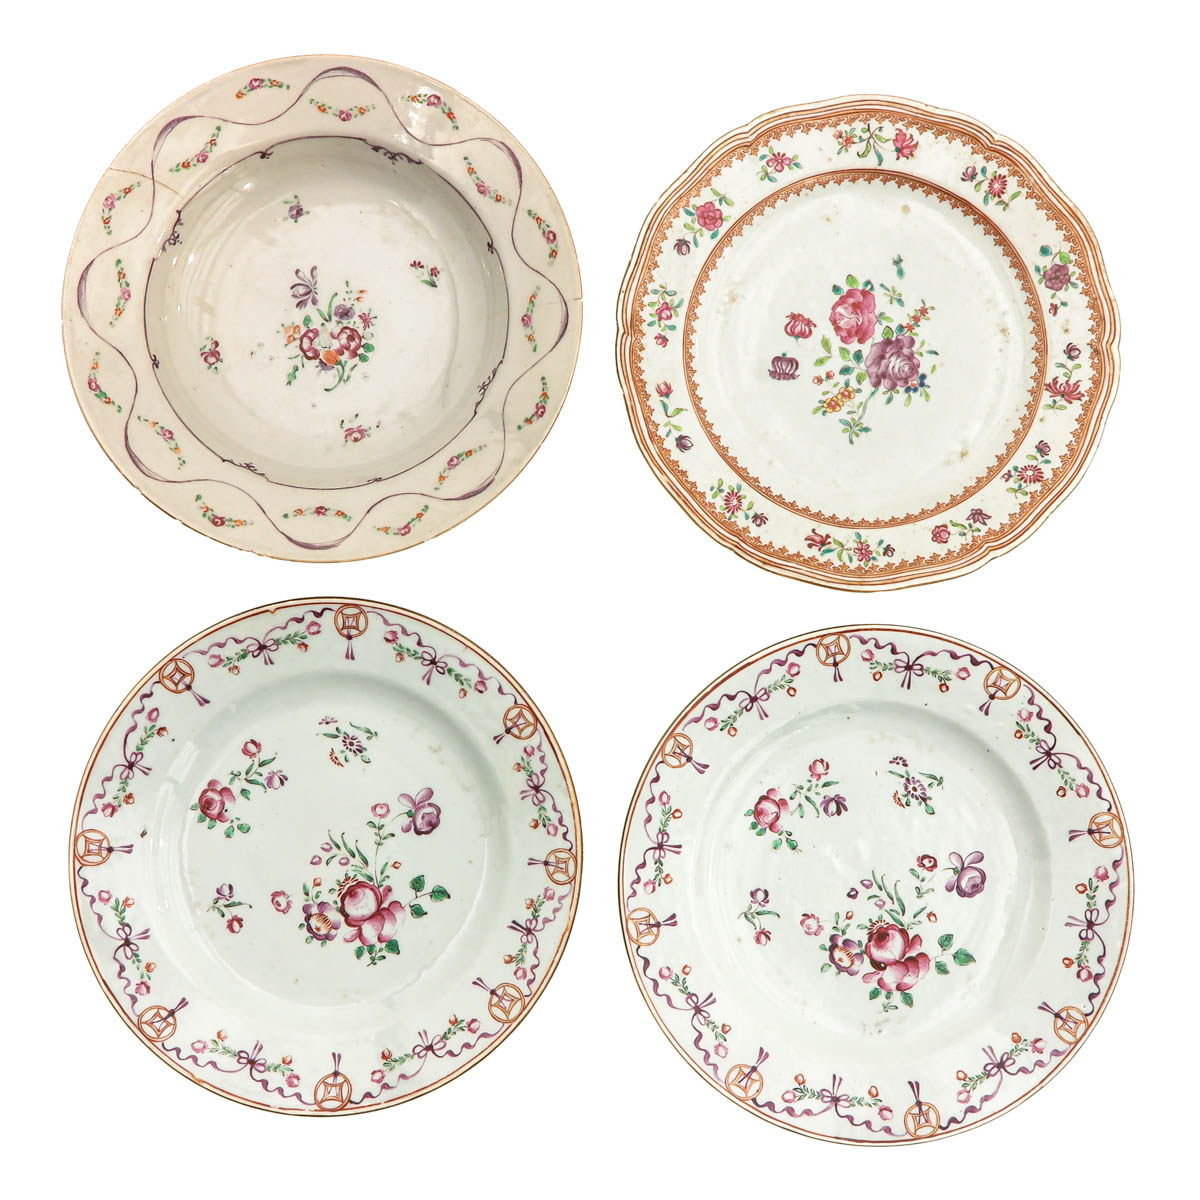 A Series of 10 Famille Rose Plates - Image 3 of 10